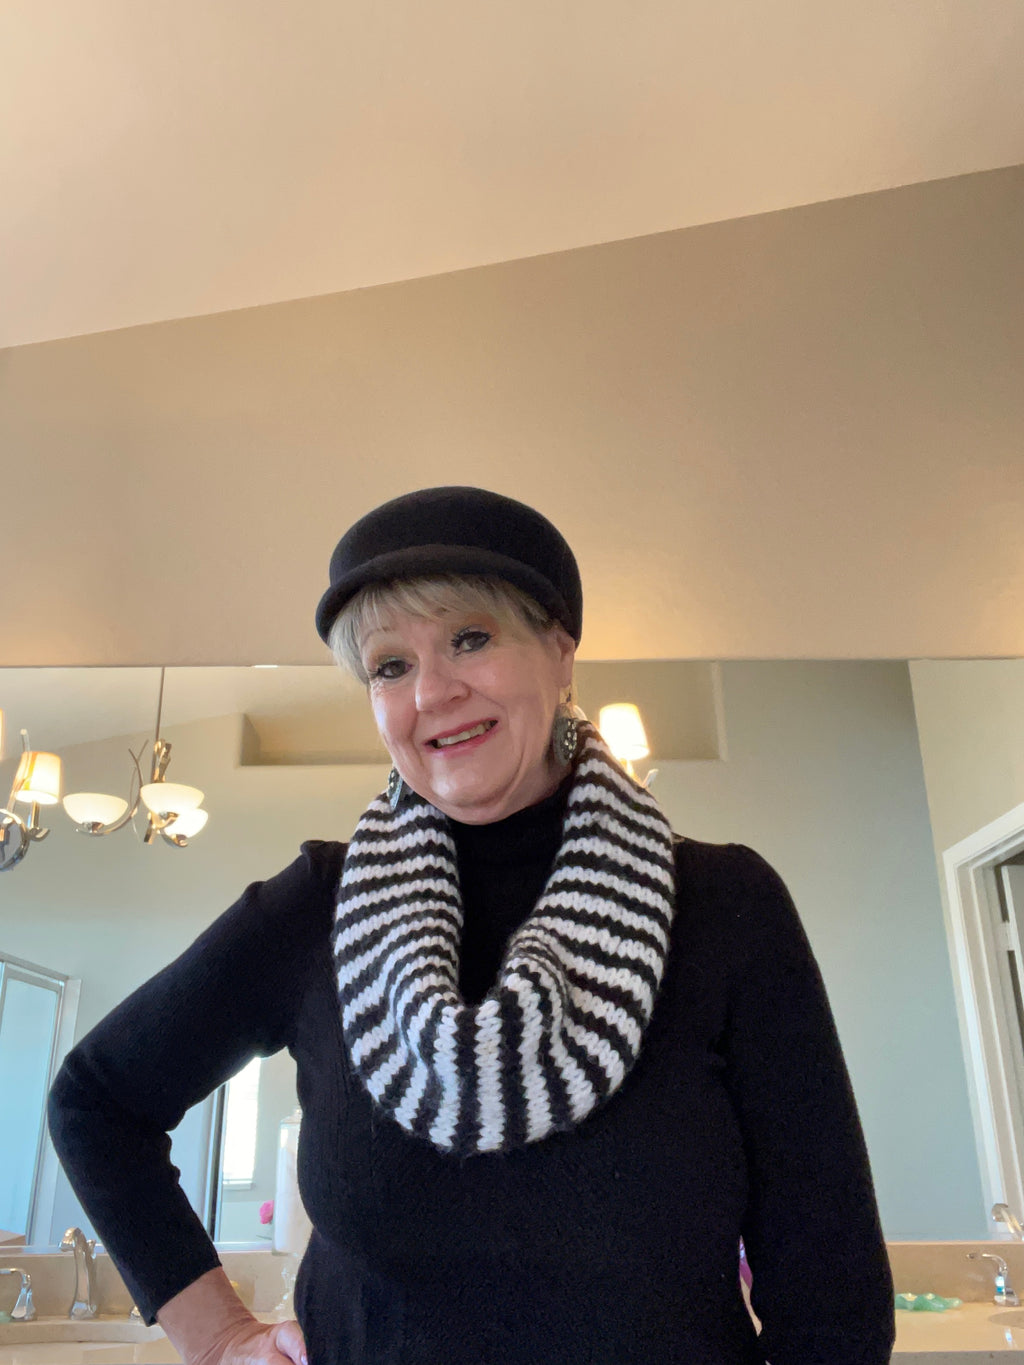 Black & White Striped Hand Knitted Infinity Scarf